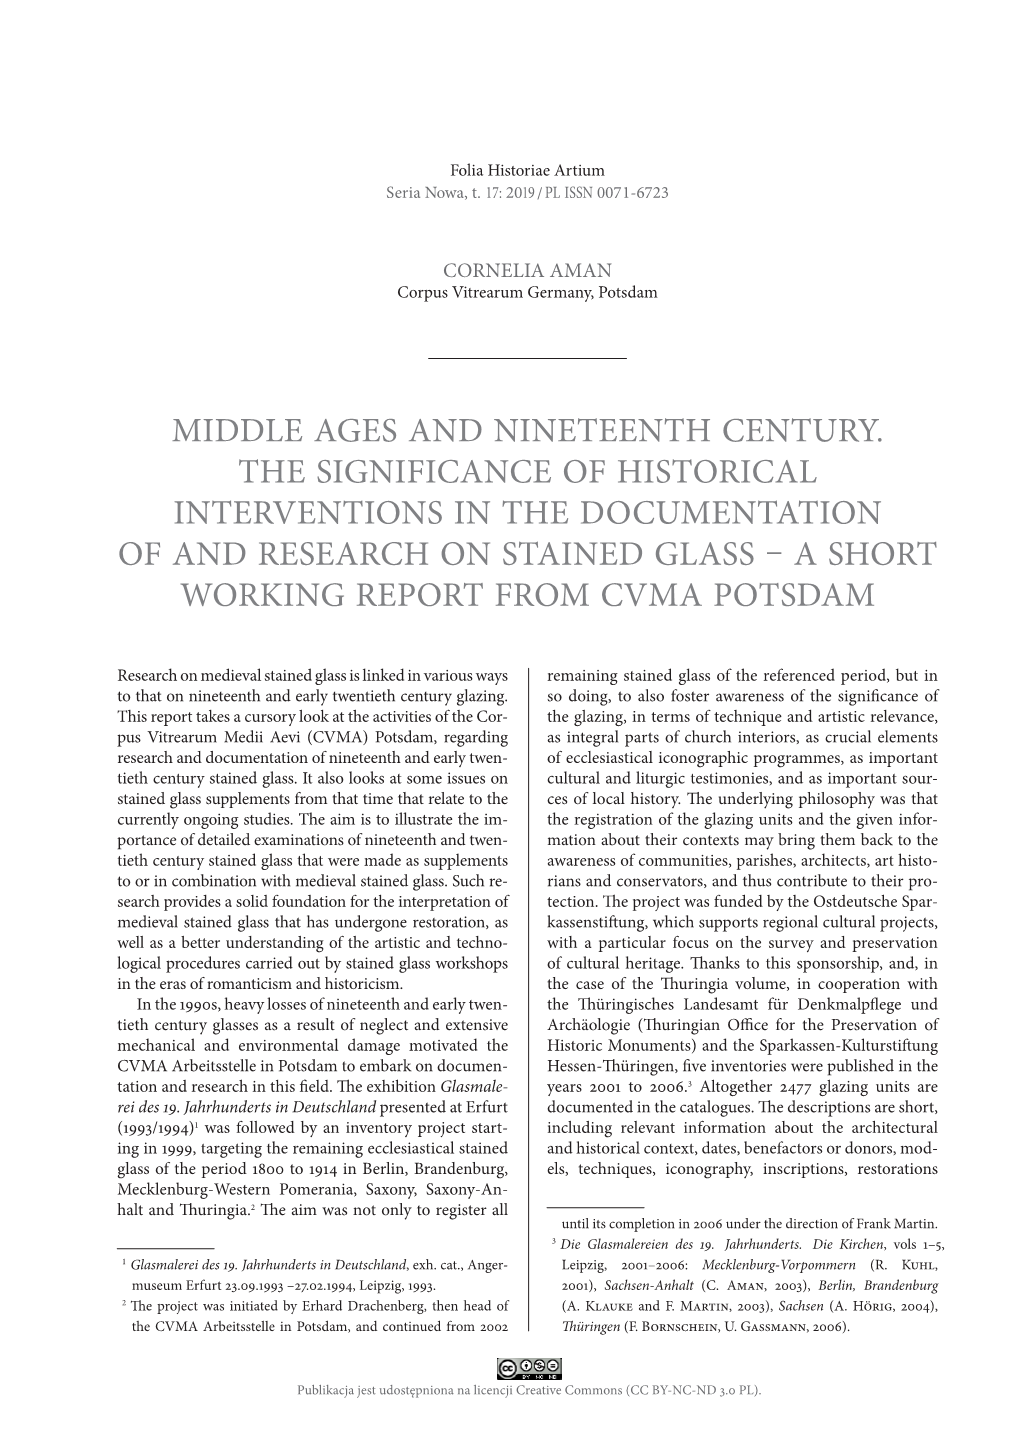 Middle Ages and Nineteenth Century. the Significance